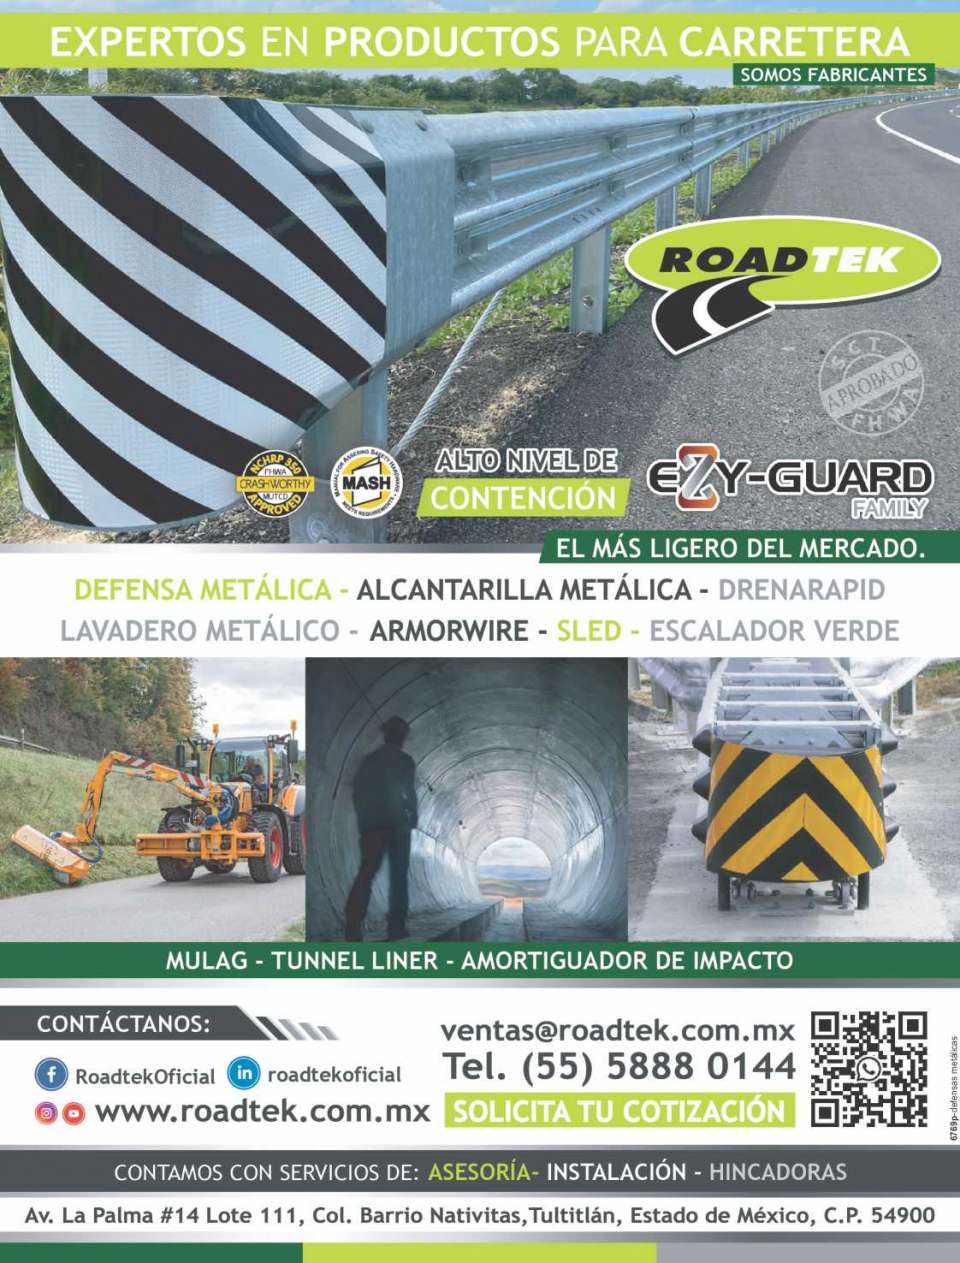 Metal fender, green climber, metal culvert, road and iron tunnel coverings, road maintenance, stormwater evacuation,